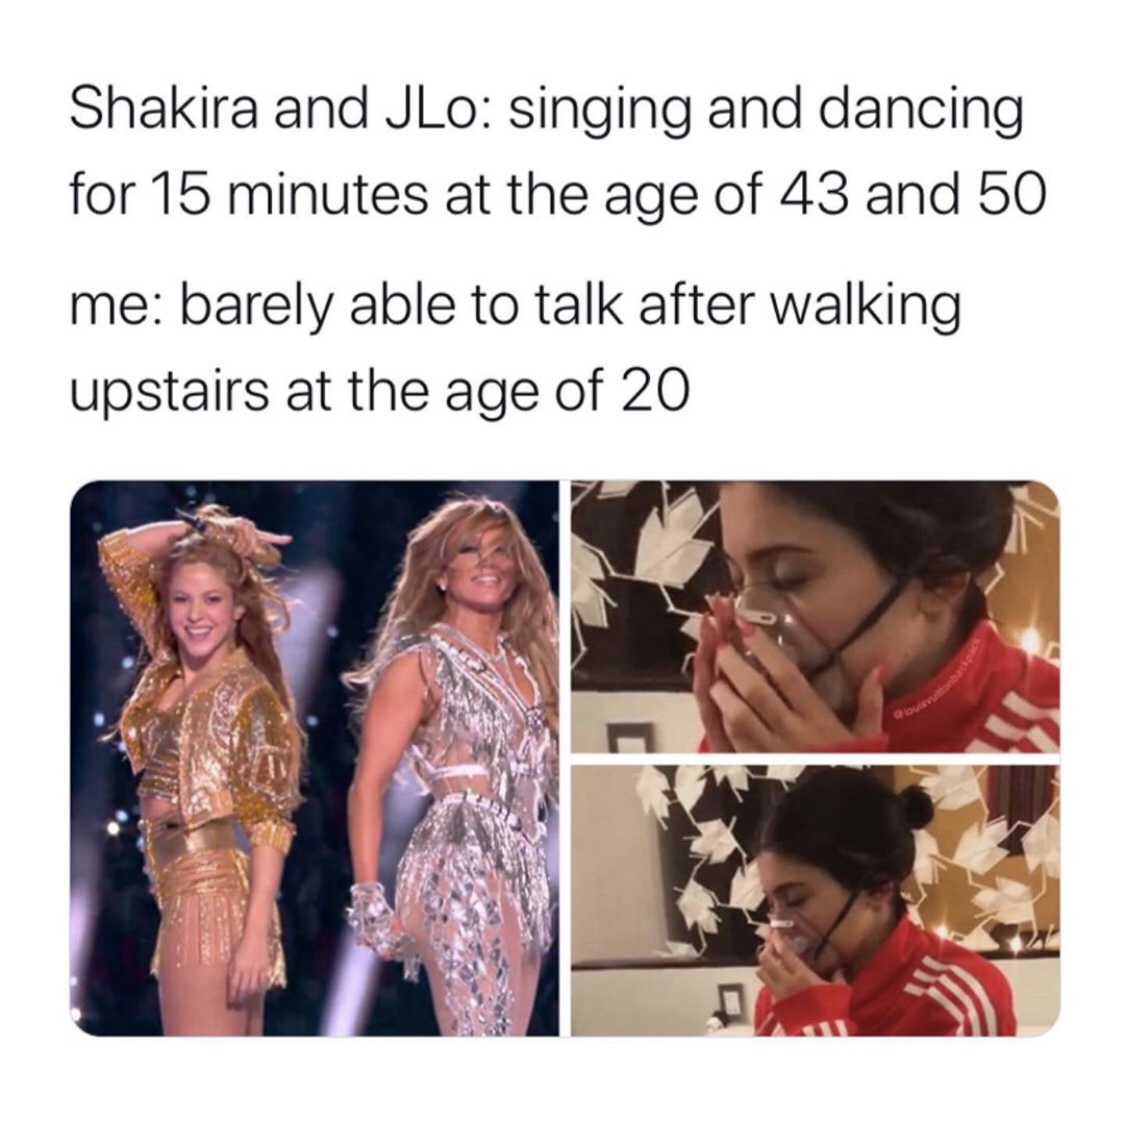 media - Shakira and JLo singing and dancing for 15 minutes at the age of 43 and 50 me barely able to talk after walking upstairs at the age of 20